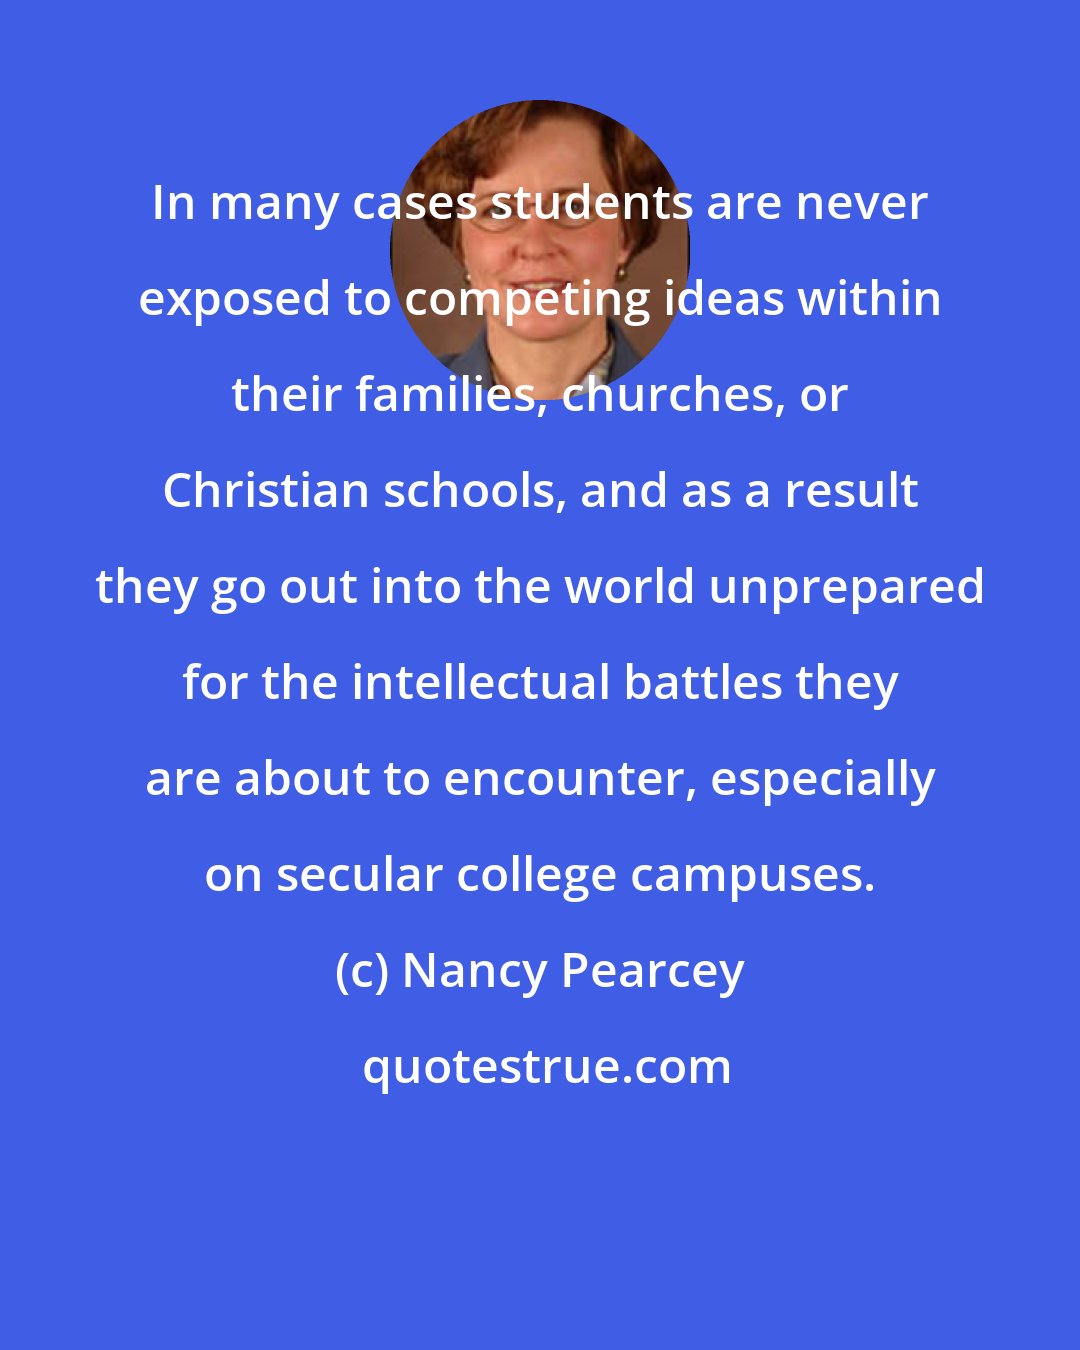 Nancy Pearcey: In many cases students are never exposed to competing ideas within their families, churches, or Christian schools, and as a result they go out into the world unprepared for the intellectual battles they are about to encounter, especially on secular college campuses.